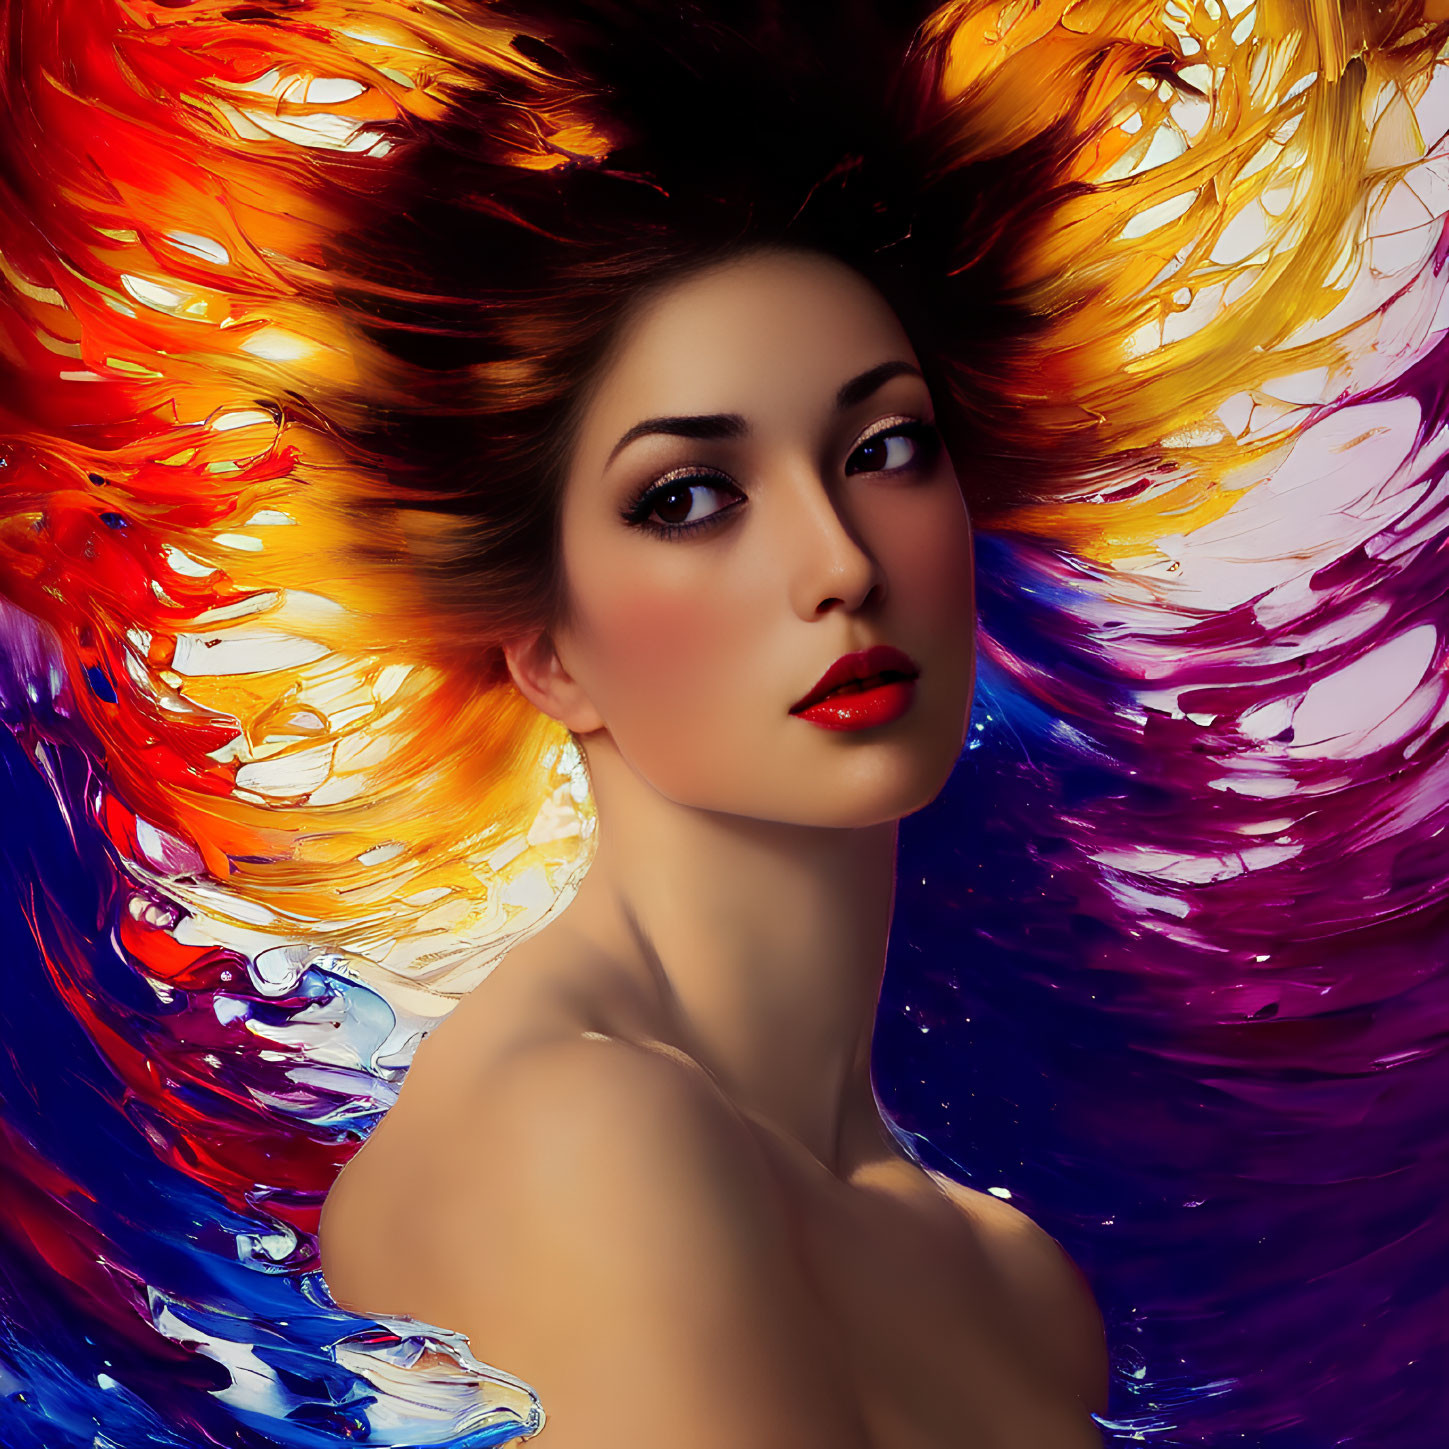 Vibrant digital artwork of woman with fiery and cool colored hair